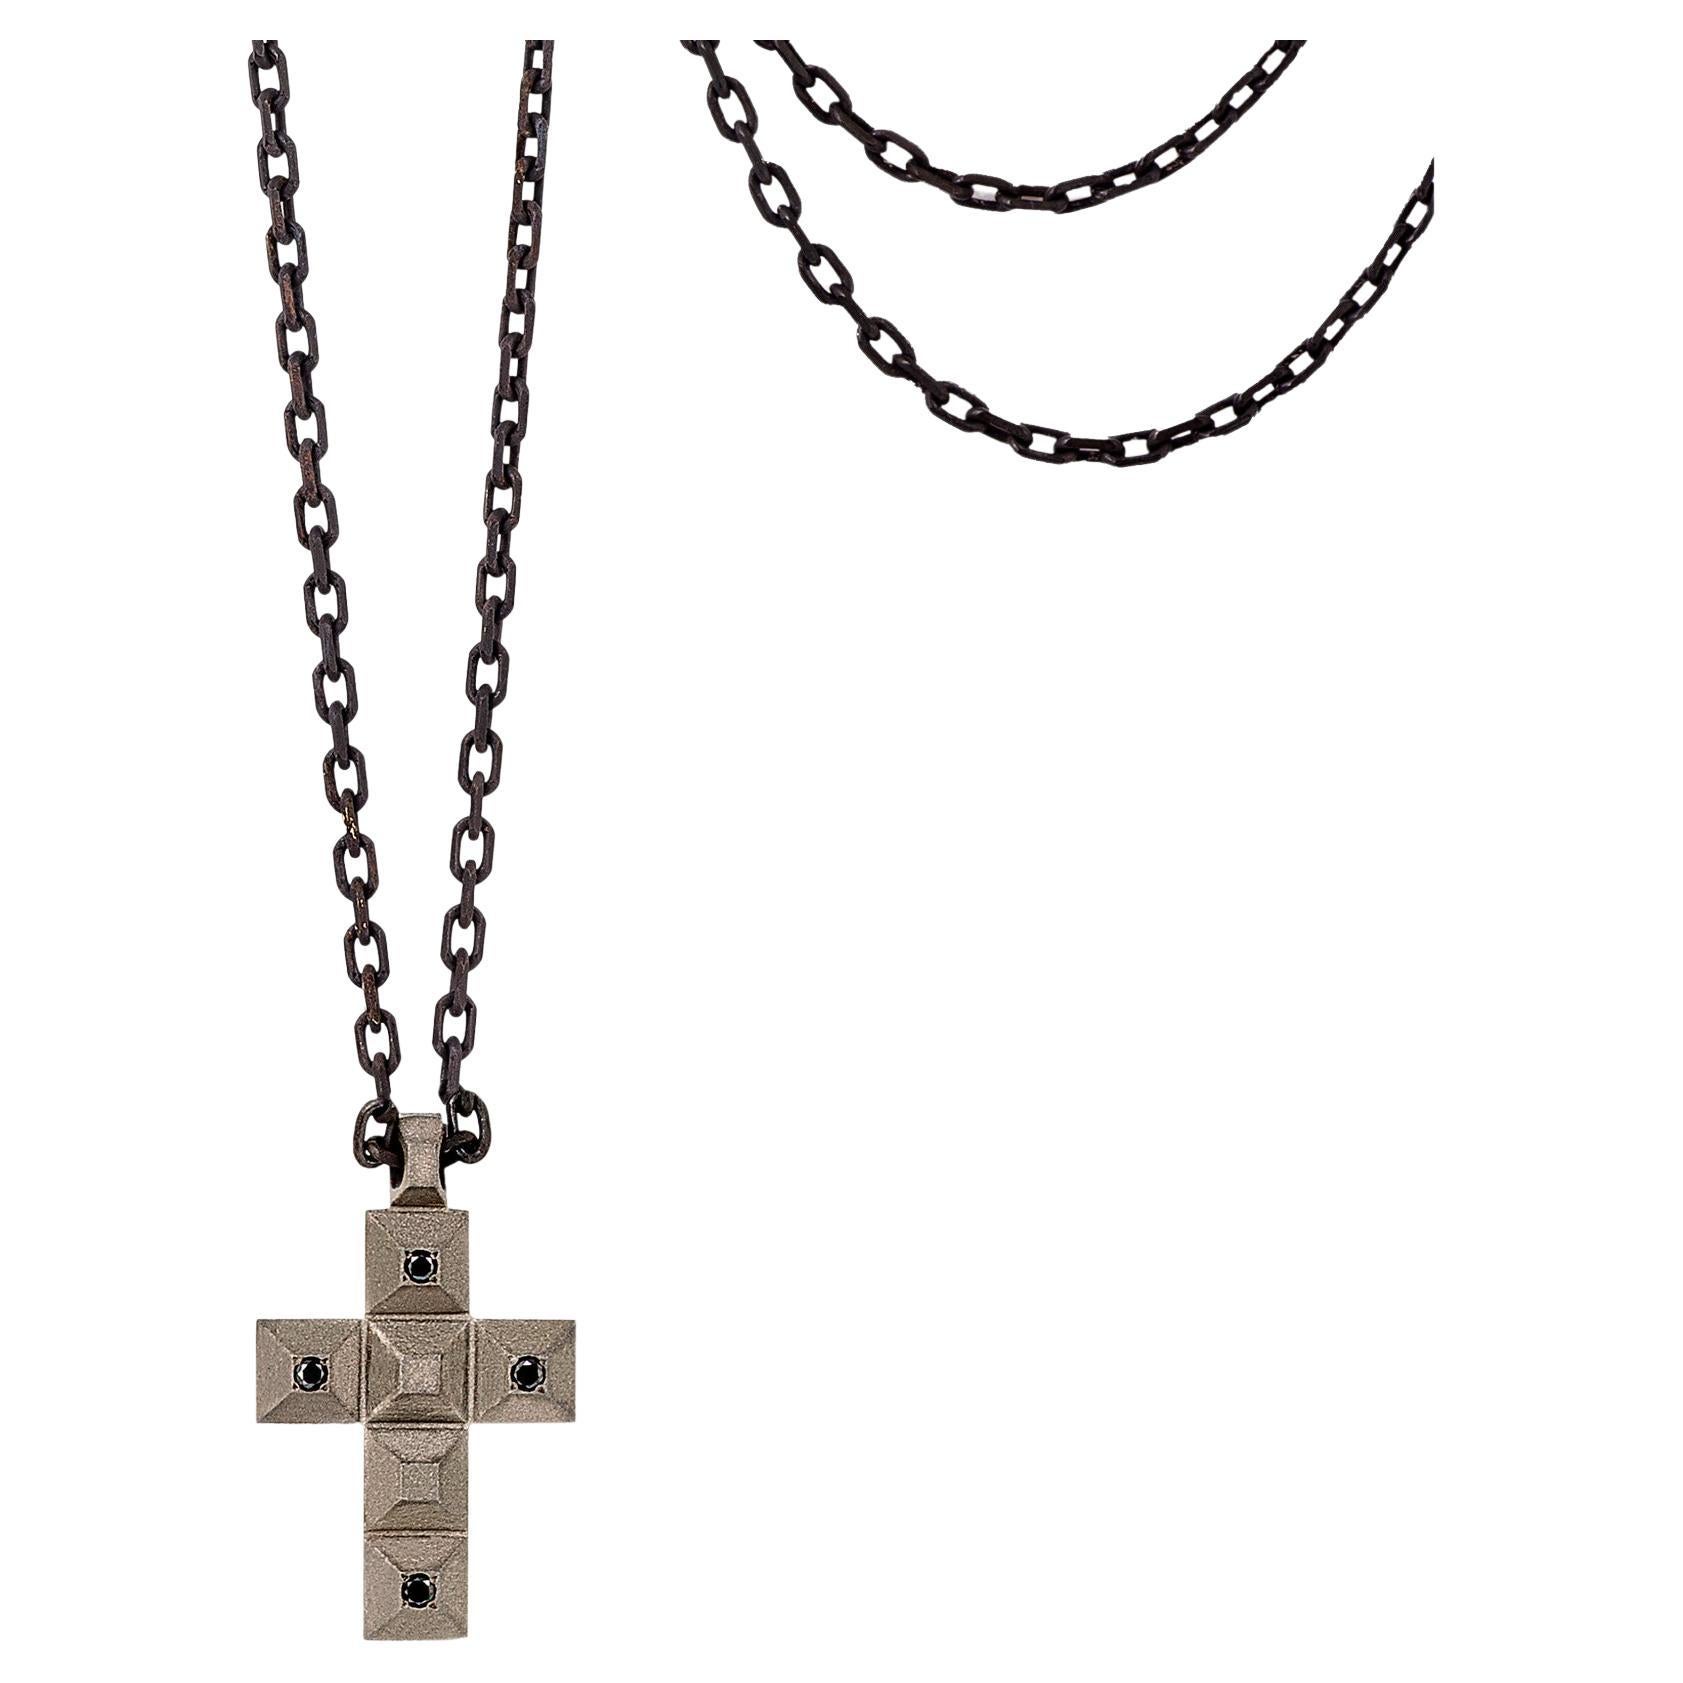 Men's Titanium Necklace with Small Cross, Black Diamonds and 9KT Red Gold